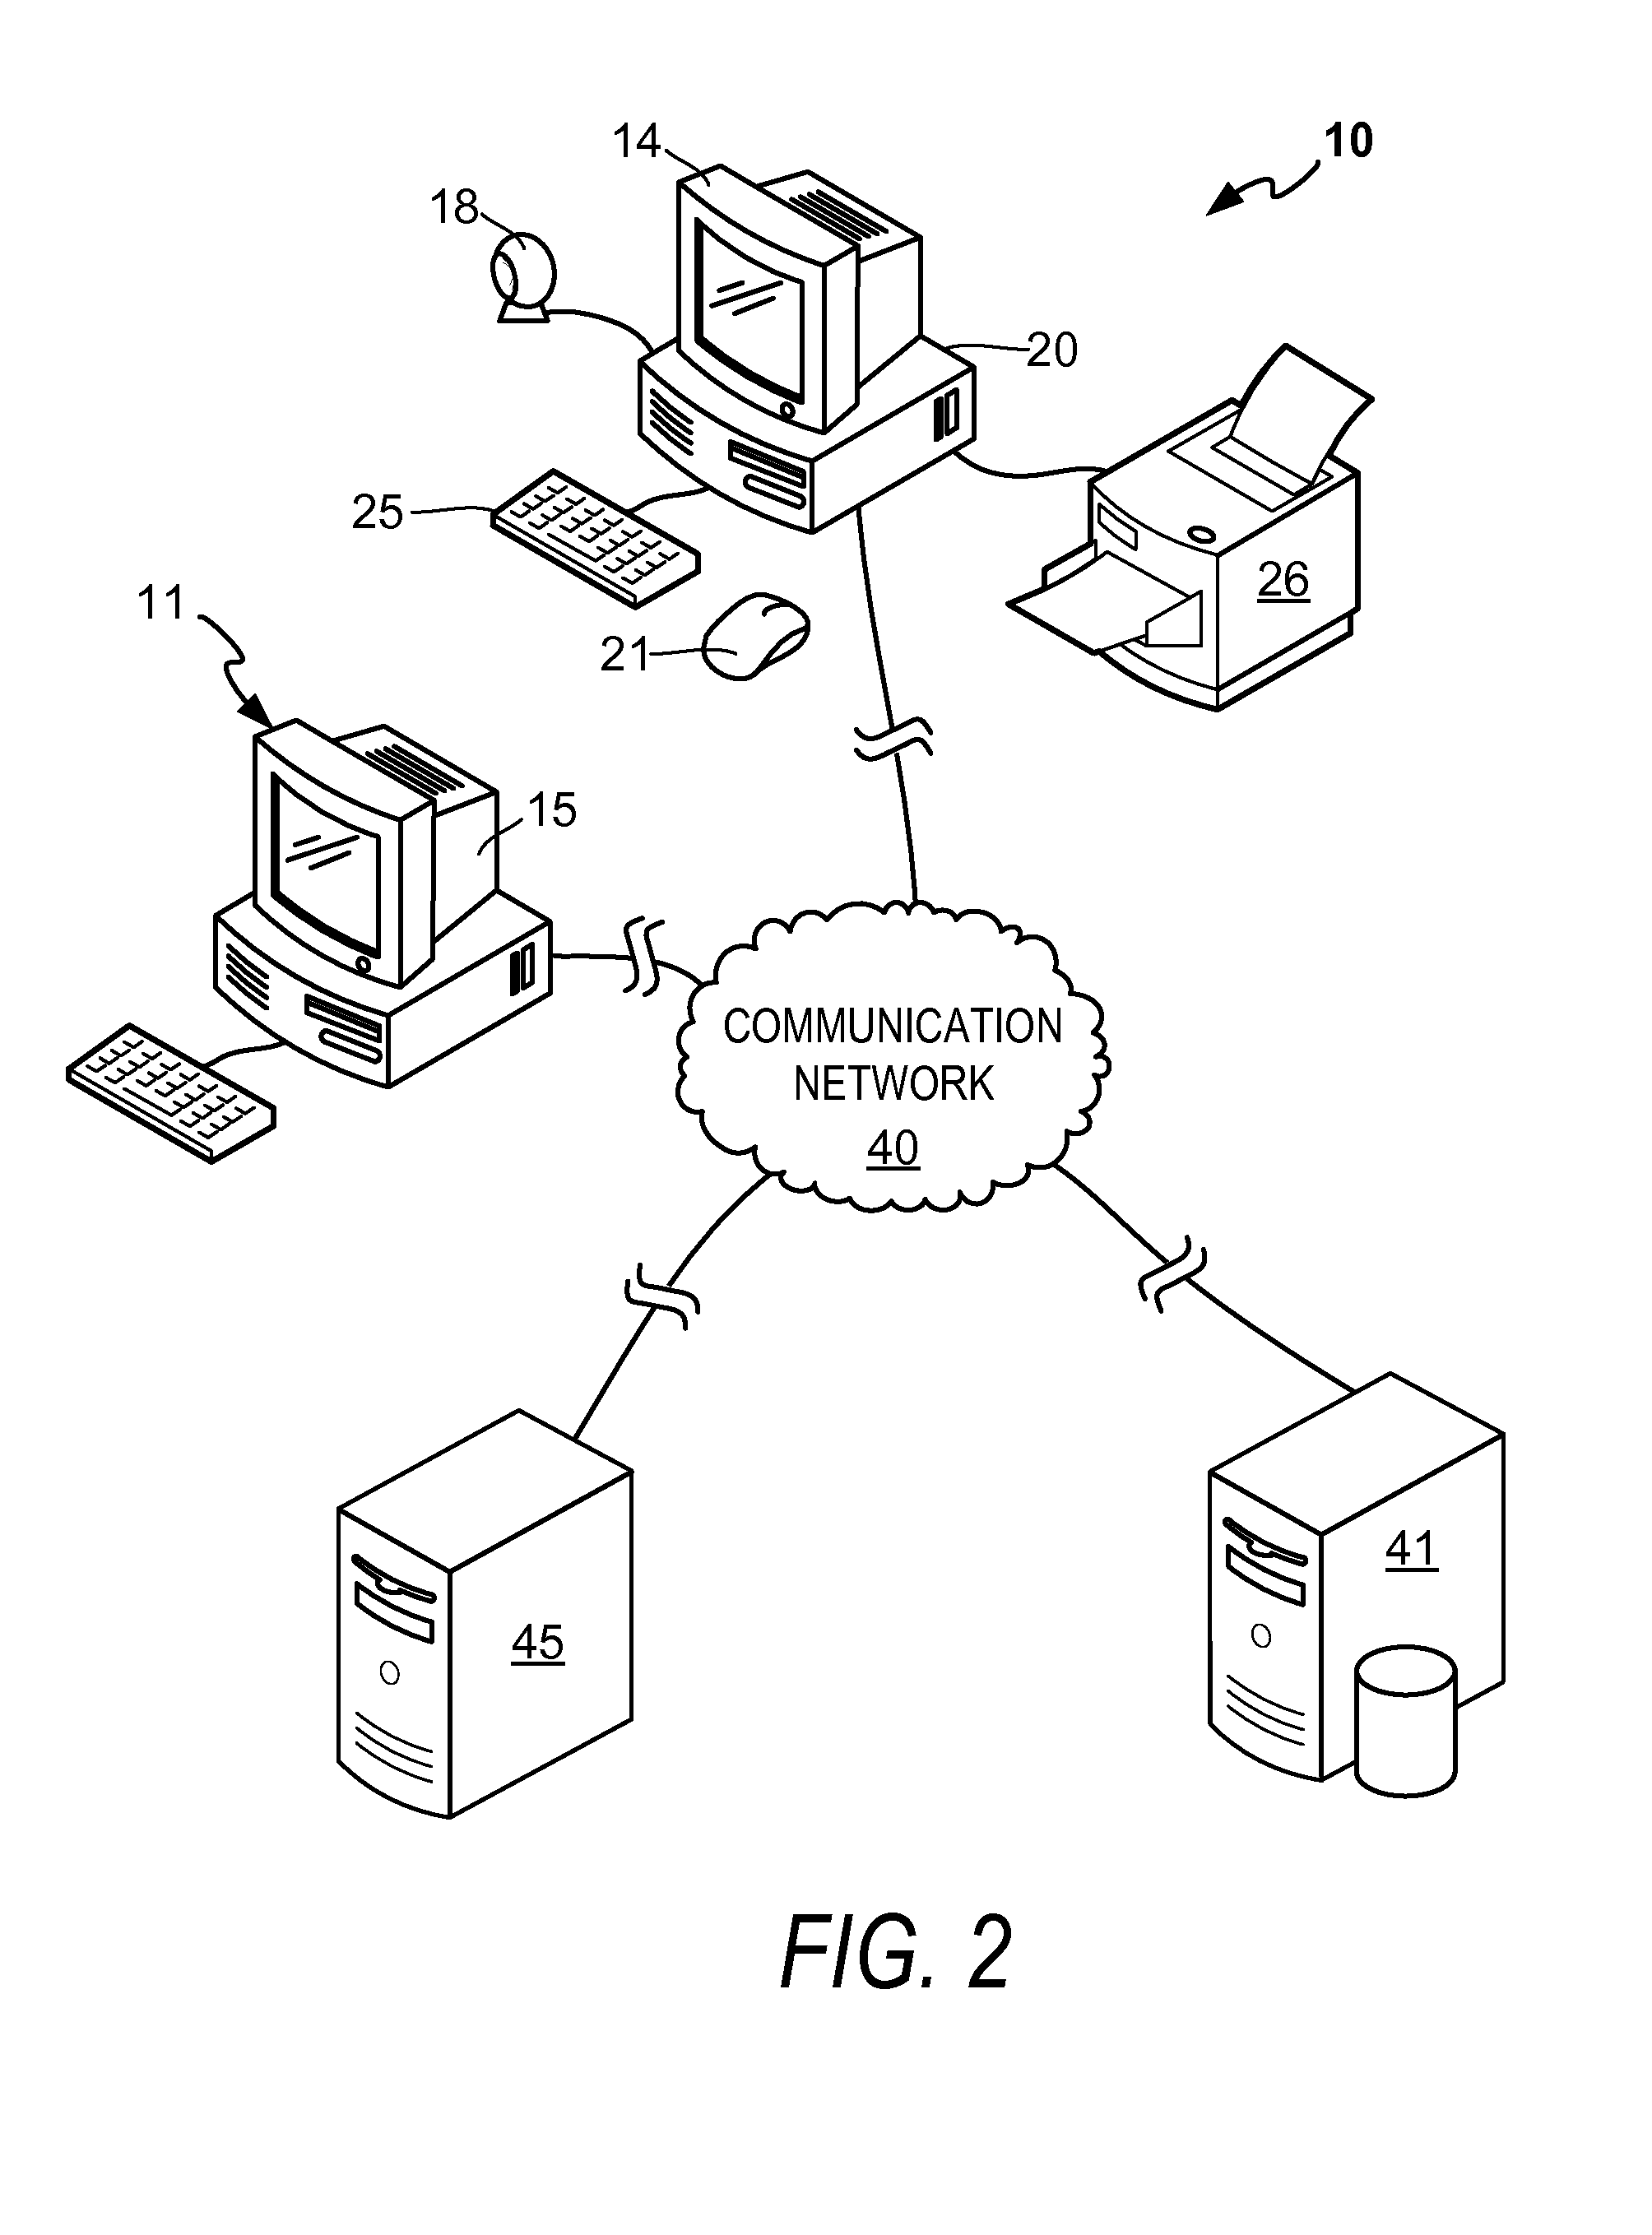 Method and apparatus for preparing a medicinal substance